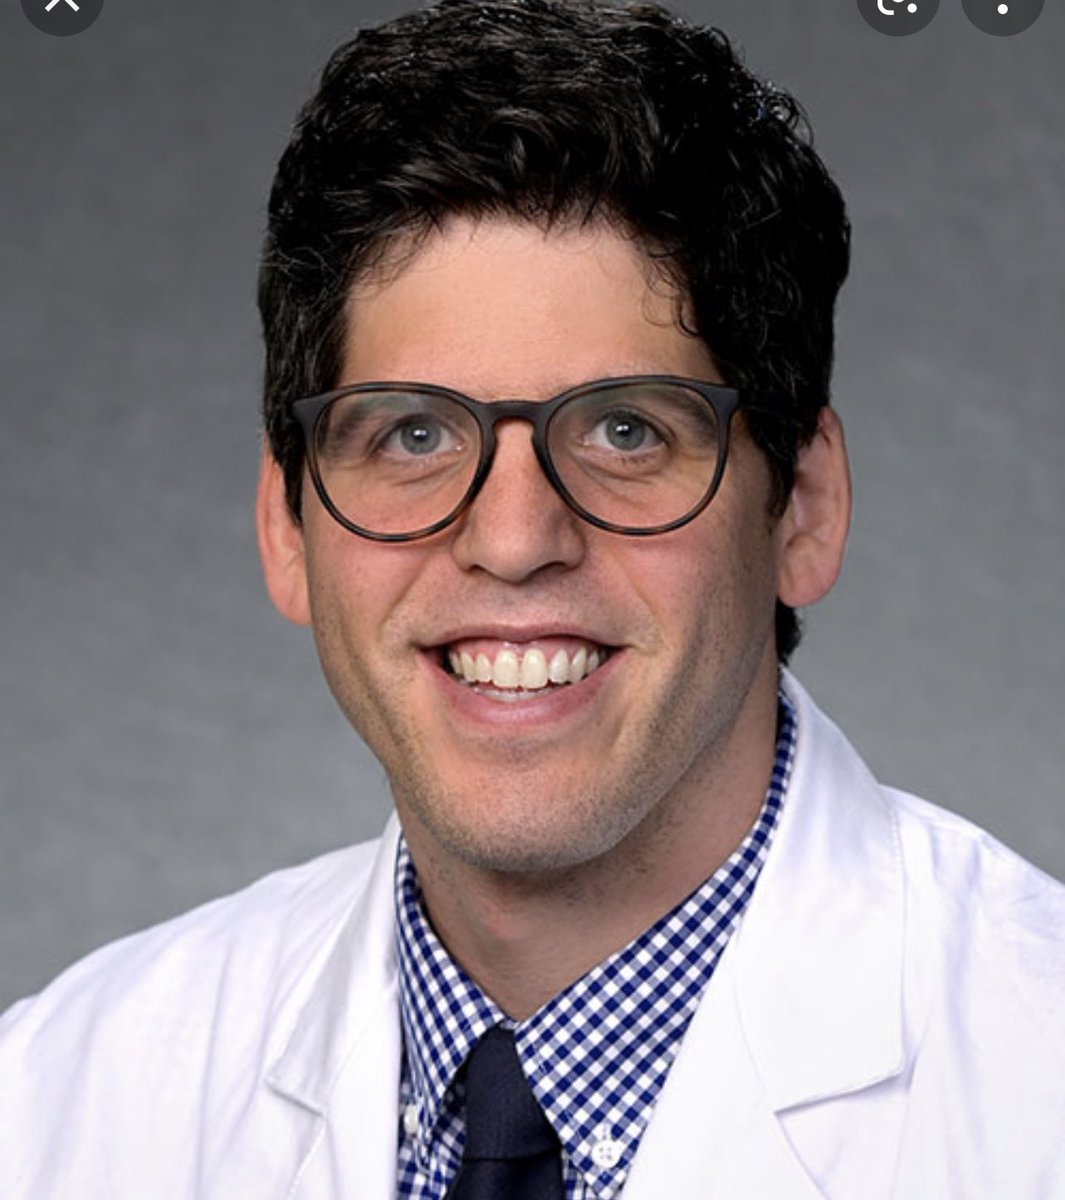 Congrats to @ACFanaroff from @PennCardiology for being selected as a 2024-2026 @SCAI ELM fellow! Alex is a rare interventionalist who also leads a research program funded by @nih_nhlbi & @AHAScience. Excited to see his continued contributions to SCAI & cardiology at large.